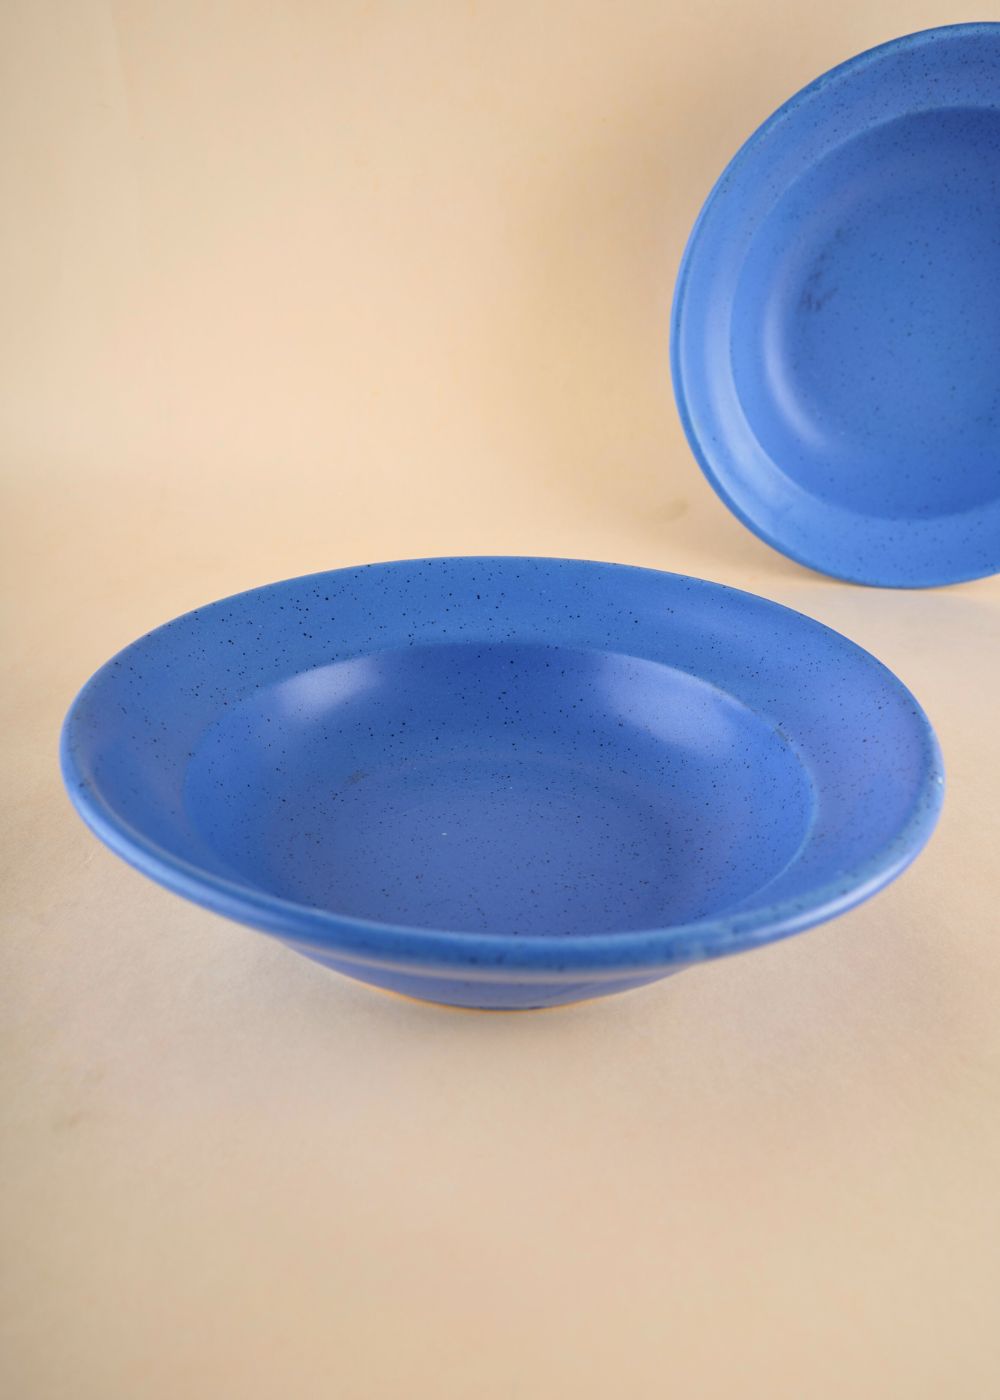 pasta plate with premium quality material